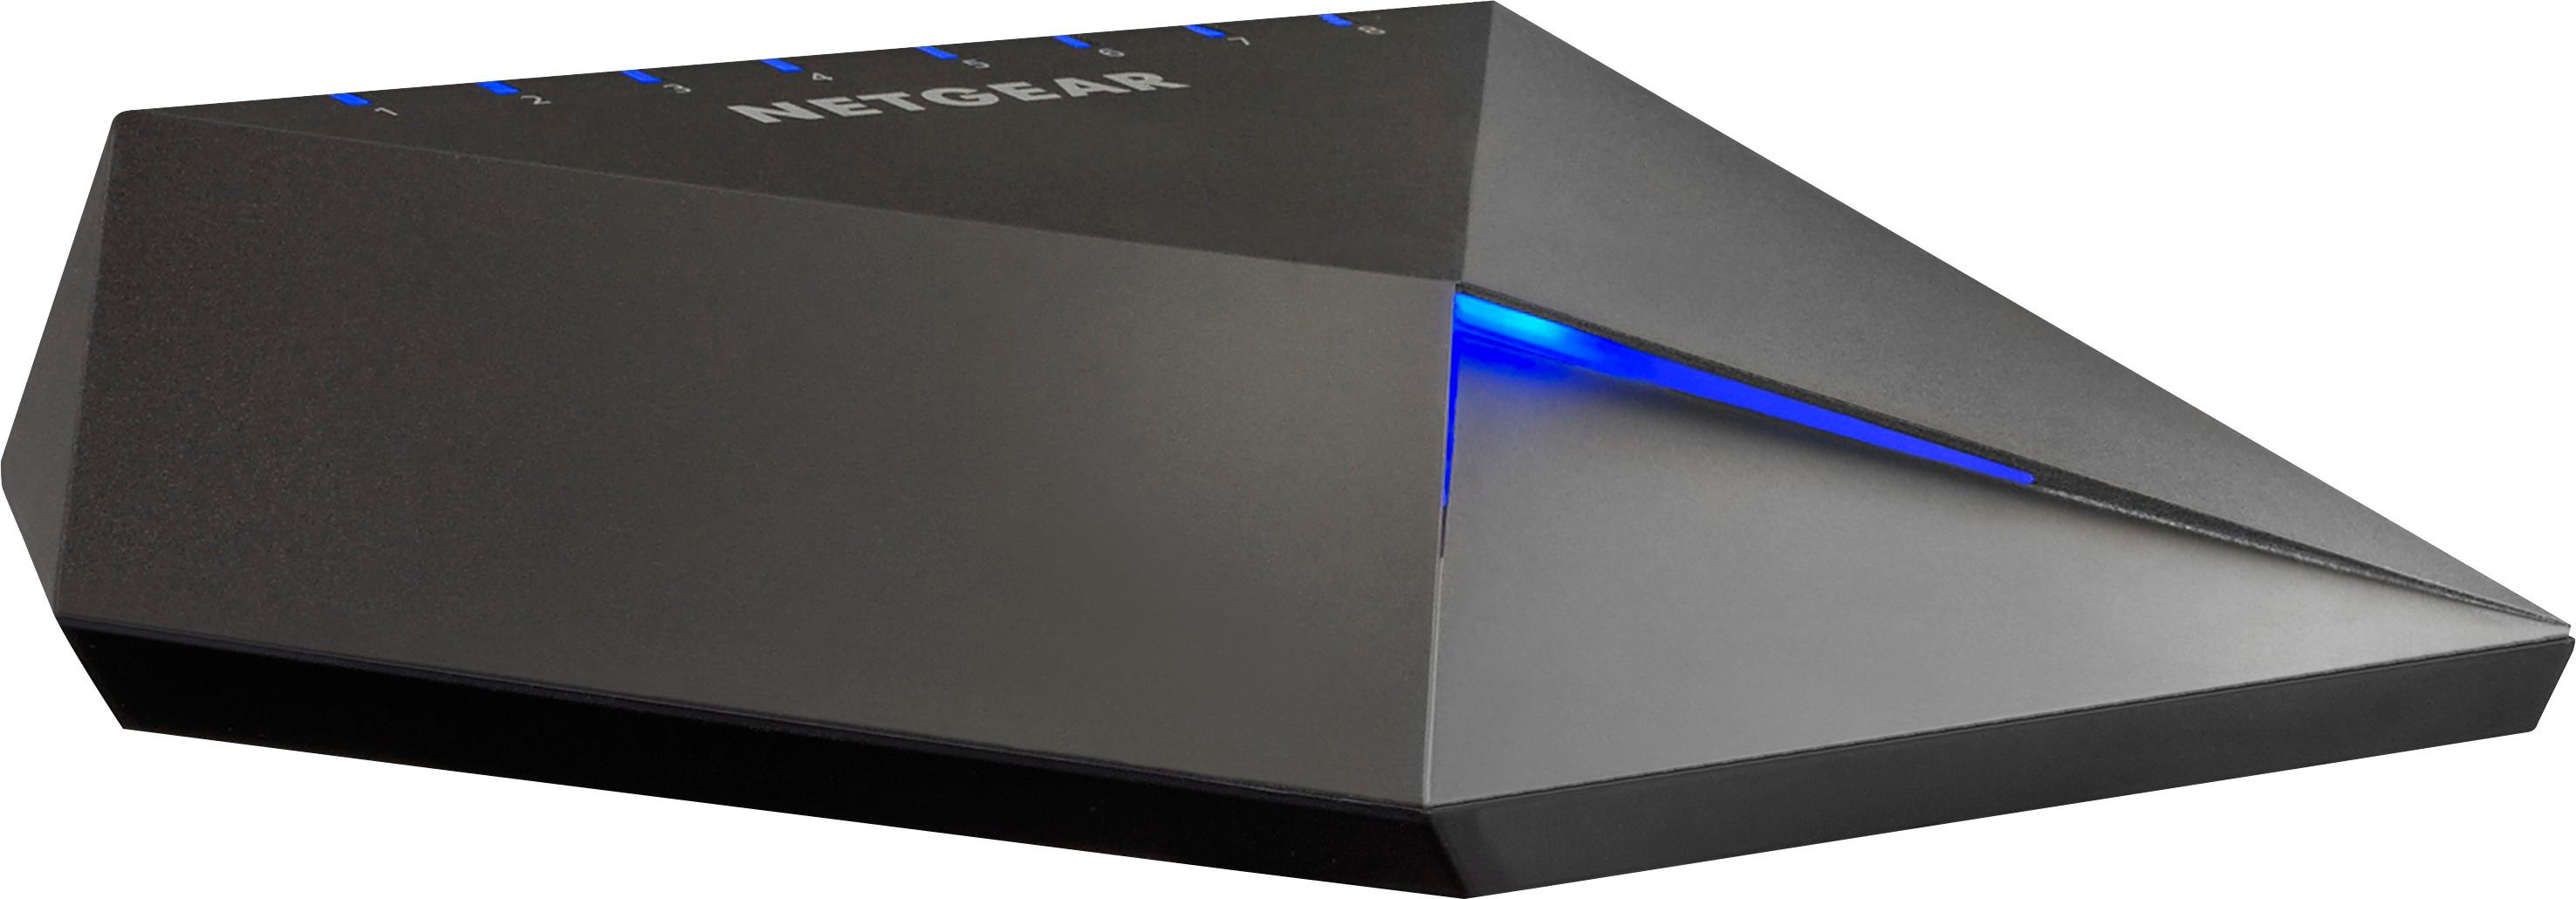 Angle View: NETGEAR - Nighthawk S8000 10/100/1000 Mbps Gigabit Gaming & Streaming Switch - Gray